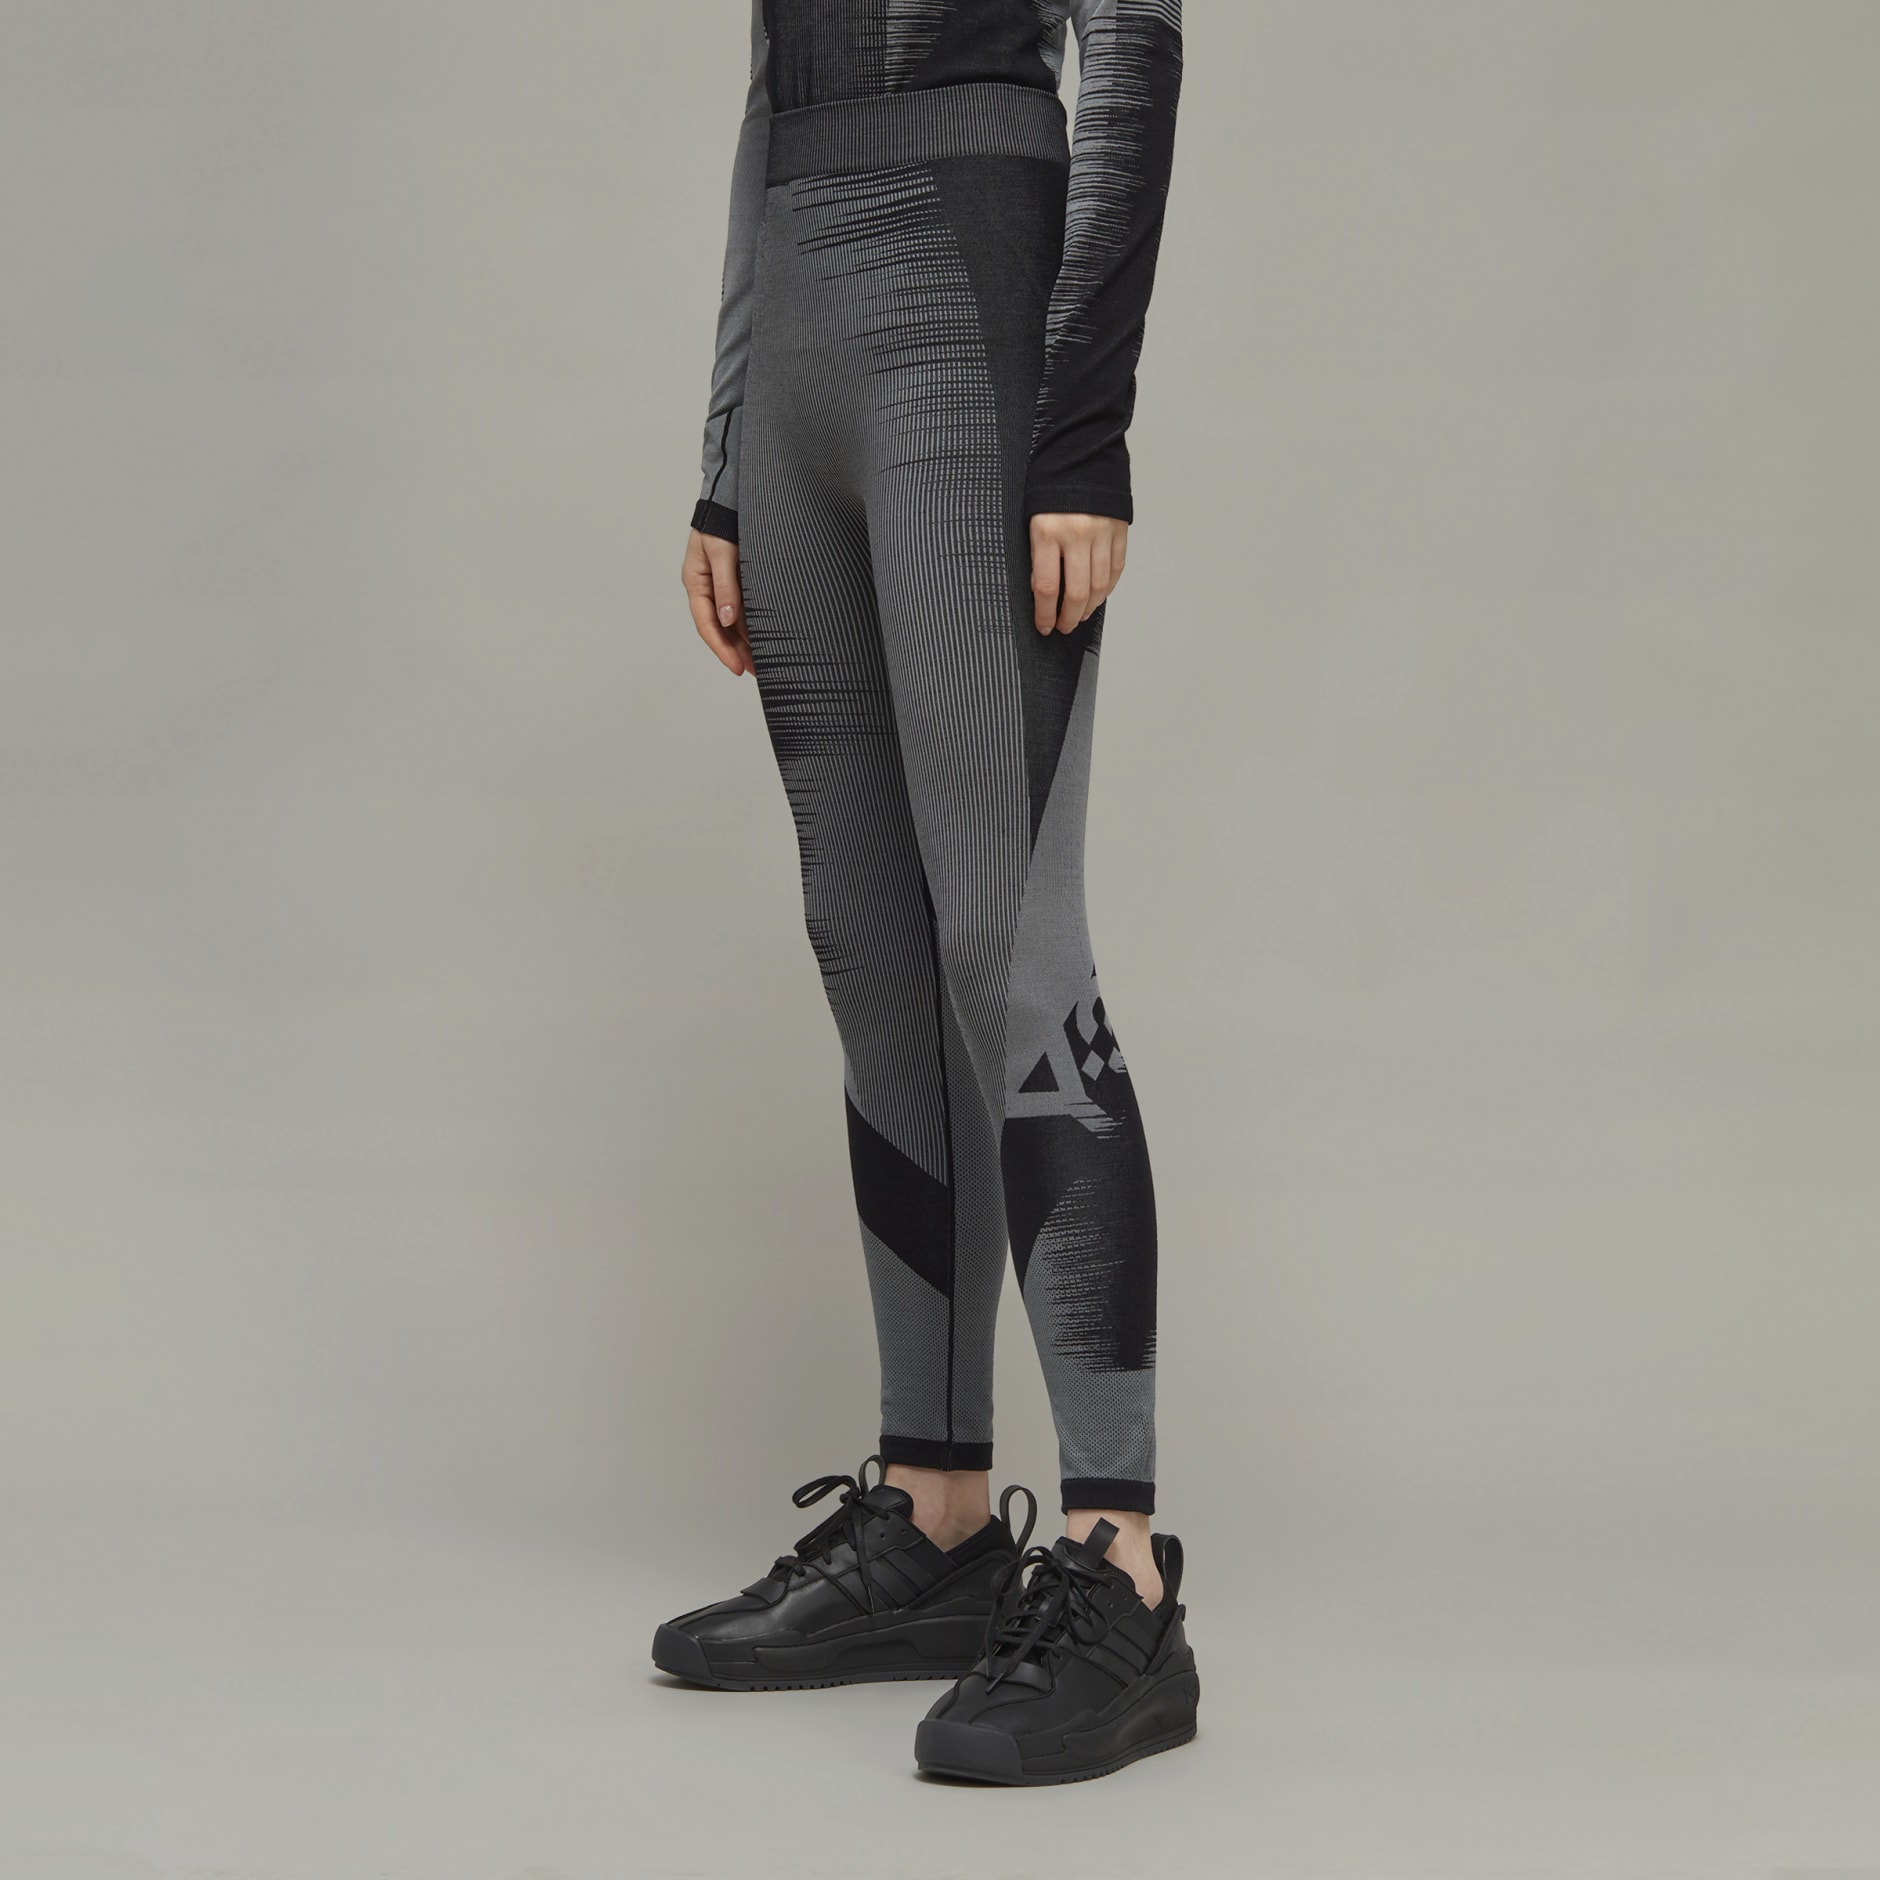 Women's Clothing - Y-3 Engineered Knit Tights - Black